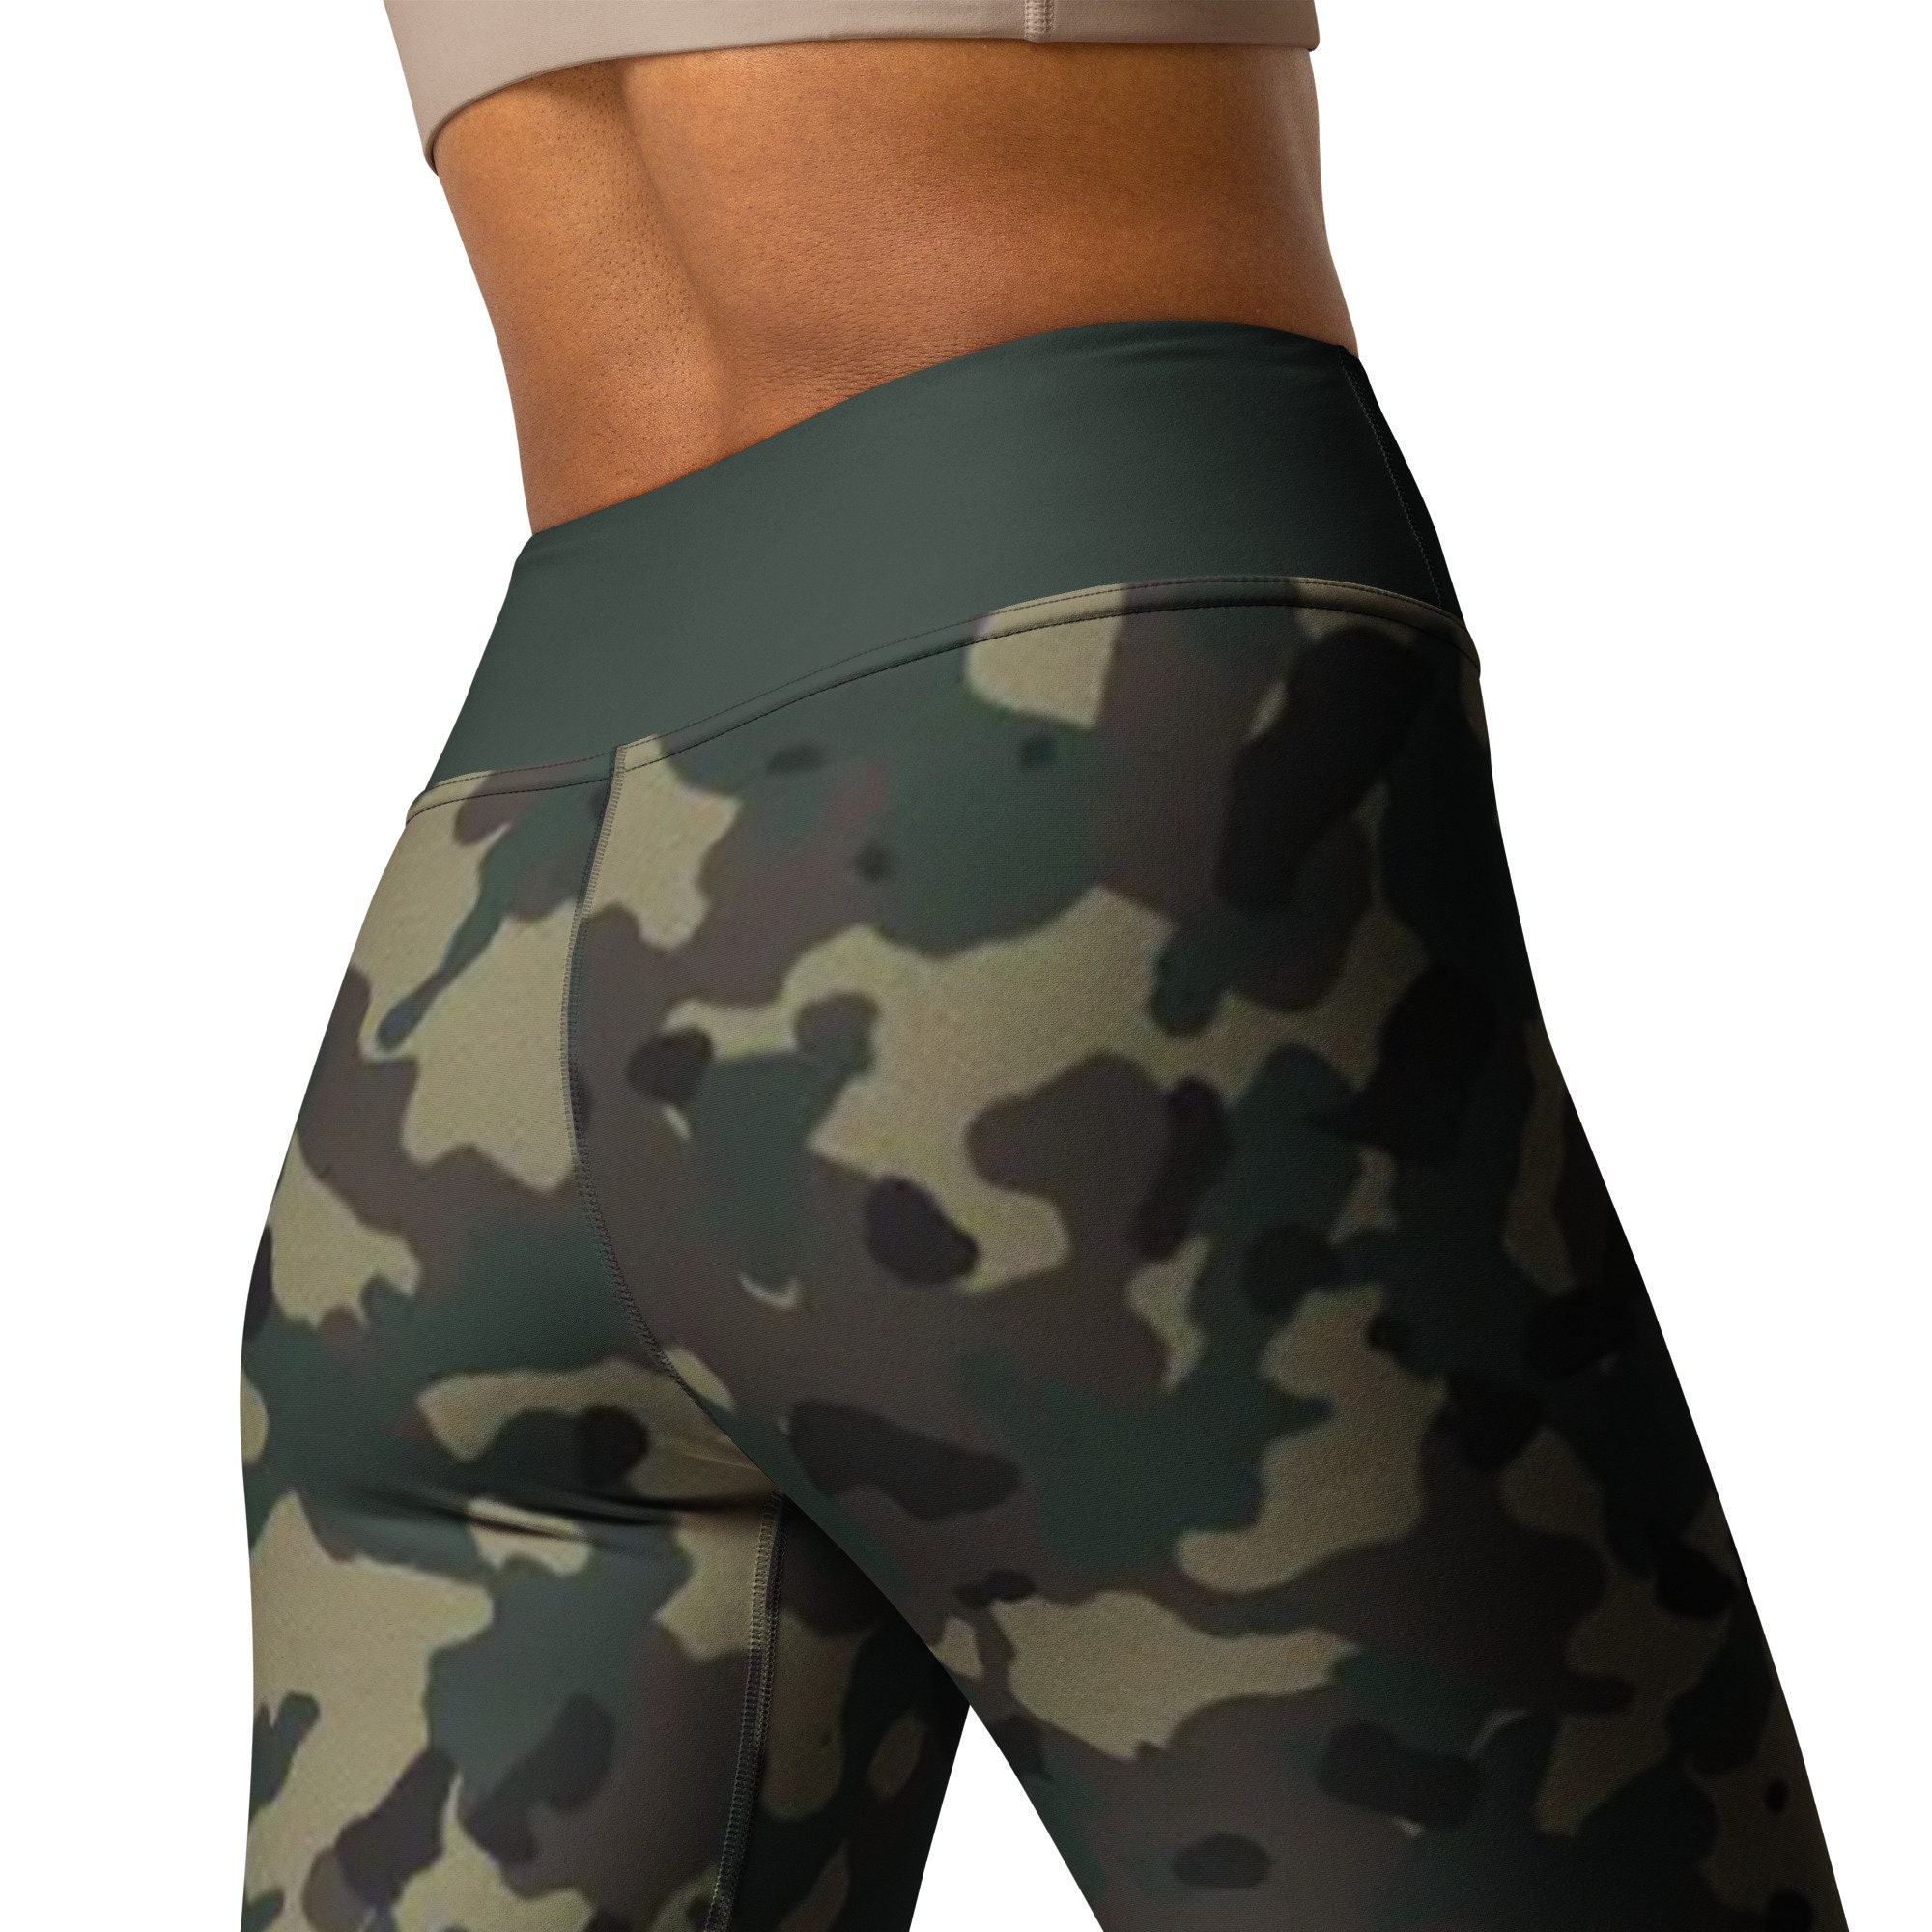 Camo Pants Camouflage Yoga Fitness Legging Fold Over Low/high Rise  Sxyfitness MADE IN USA -  Canada